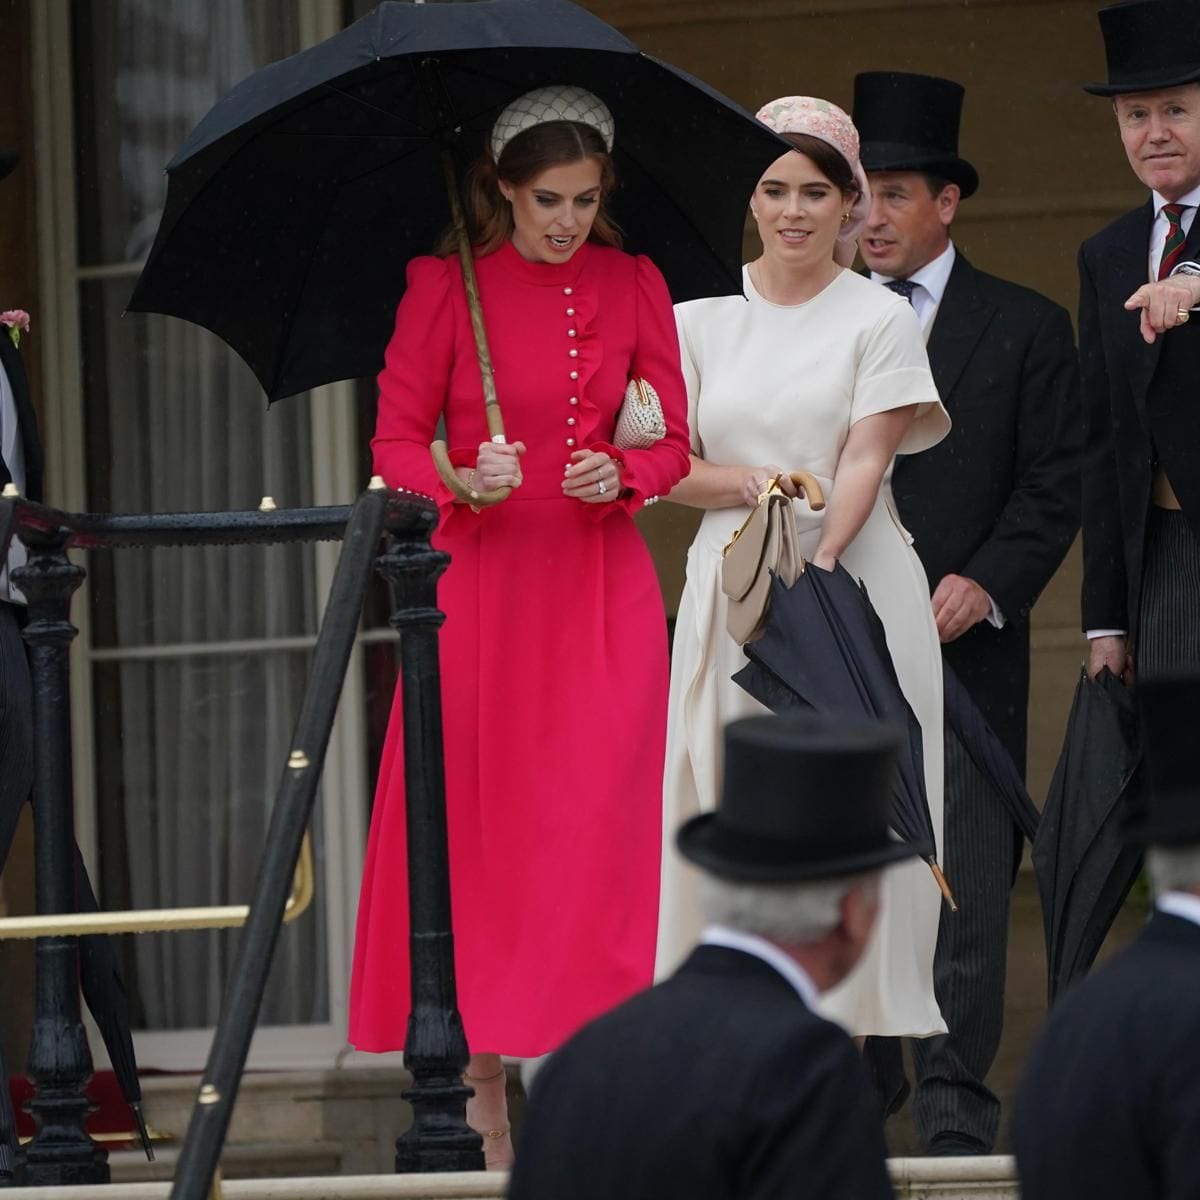 Prince Andrew's two daughters, Princess Beatrice and Princess Eugenie, were also at the party.